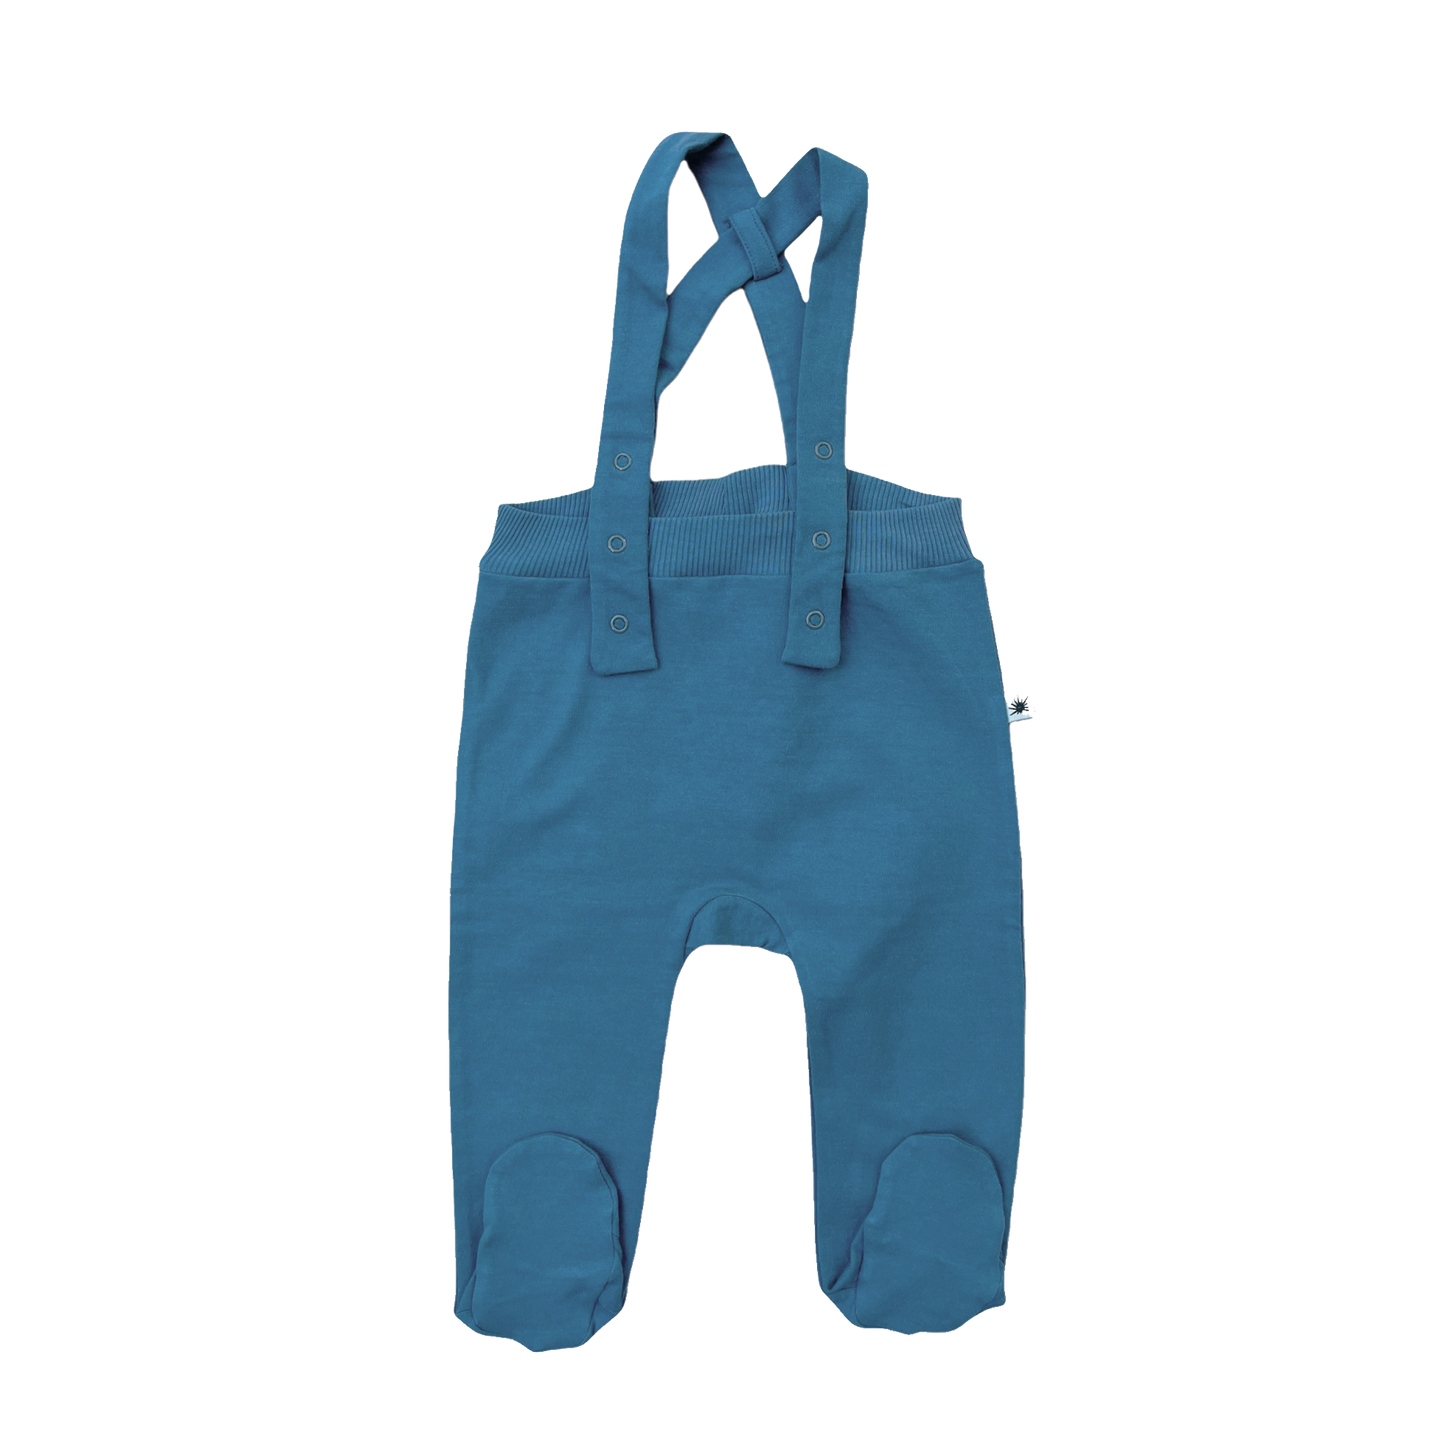 Organic Seed Baby Dungarees - Aged 0m to 6m- Colored Blue